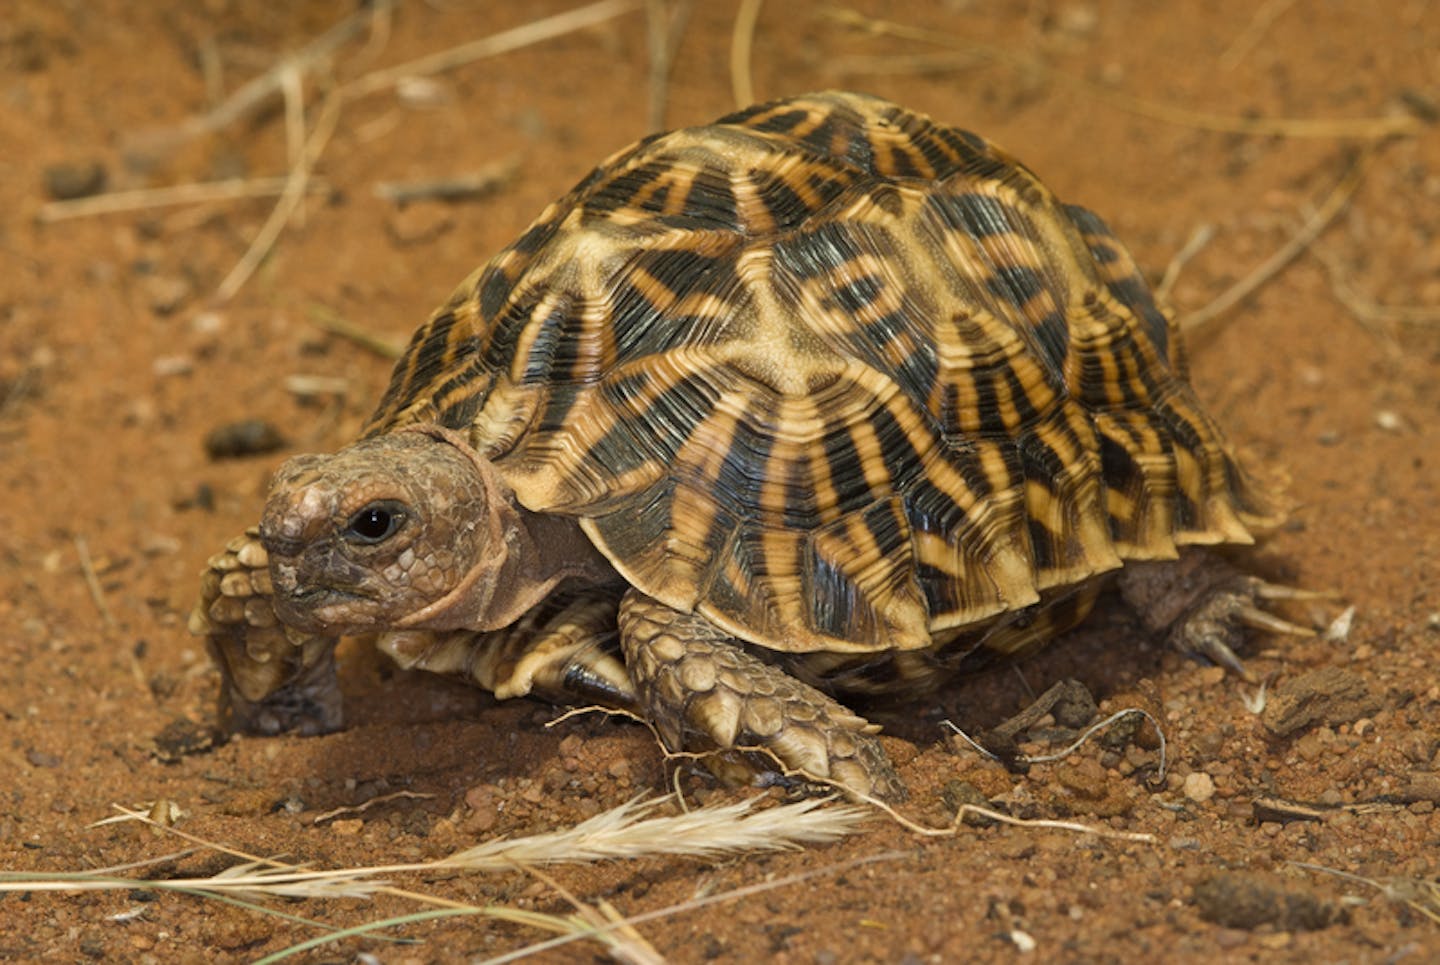 The remarkable patterns of the geometric tortoise defend against danger